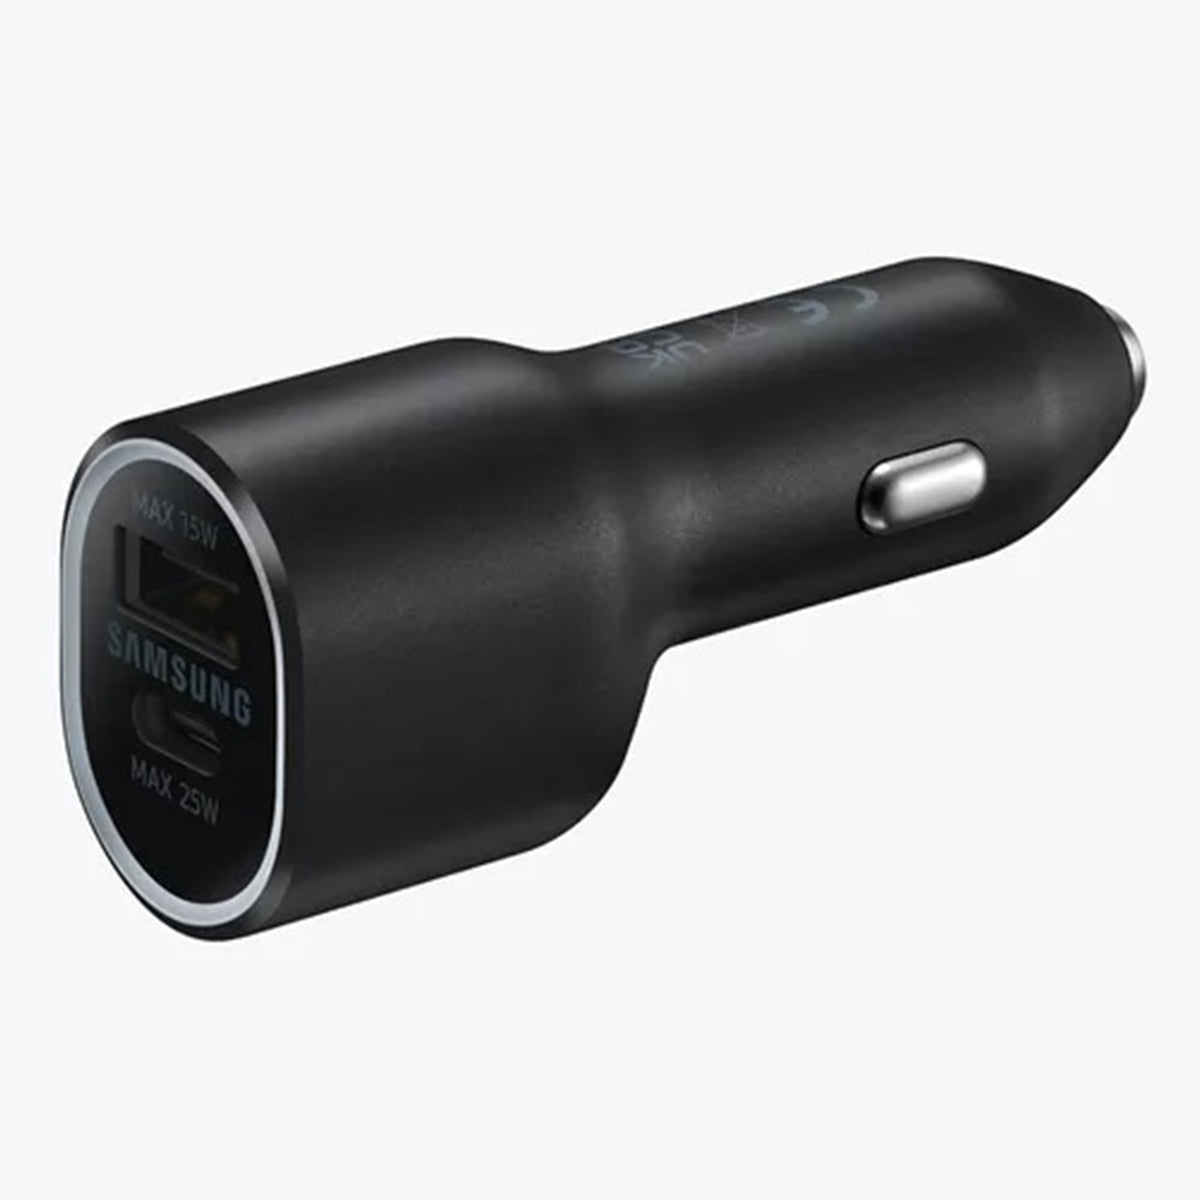 Samsung Dúo Coche Superrápido  - Samsung Duo Super Fast Car Charger